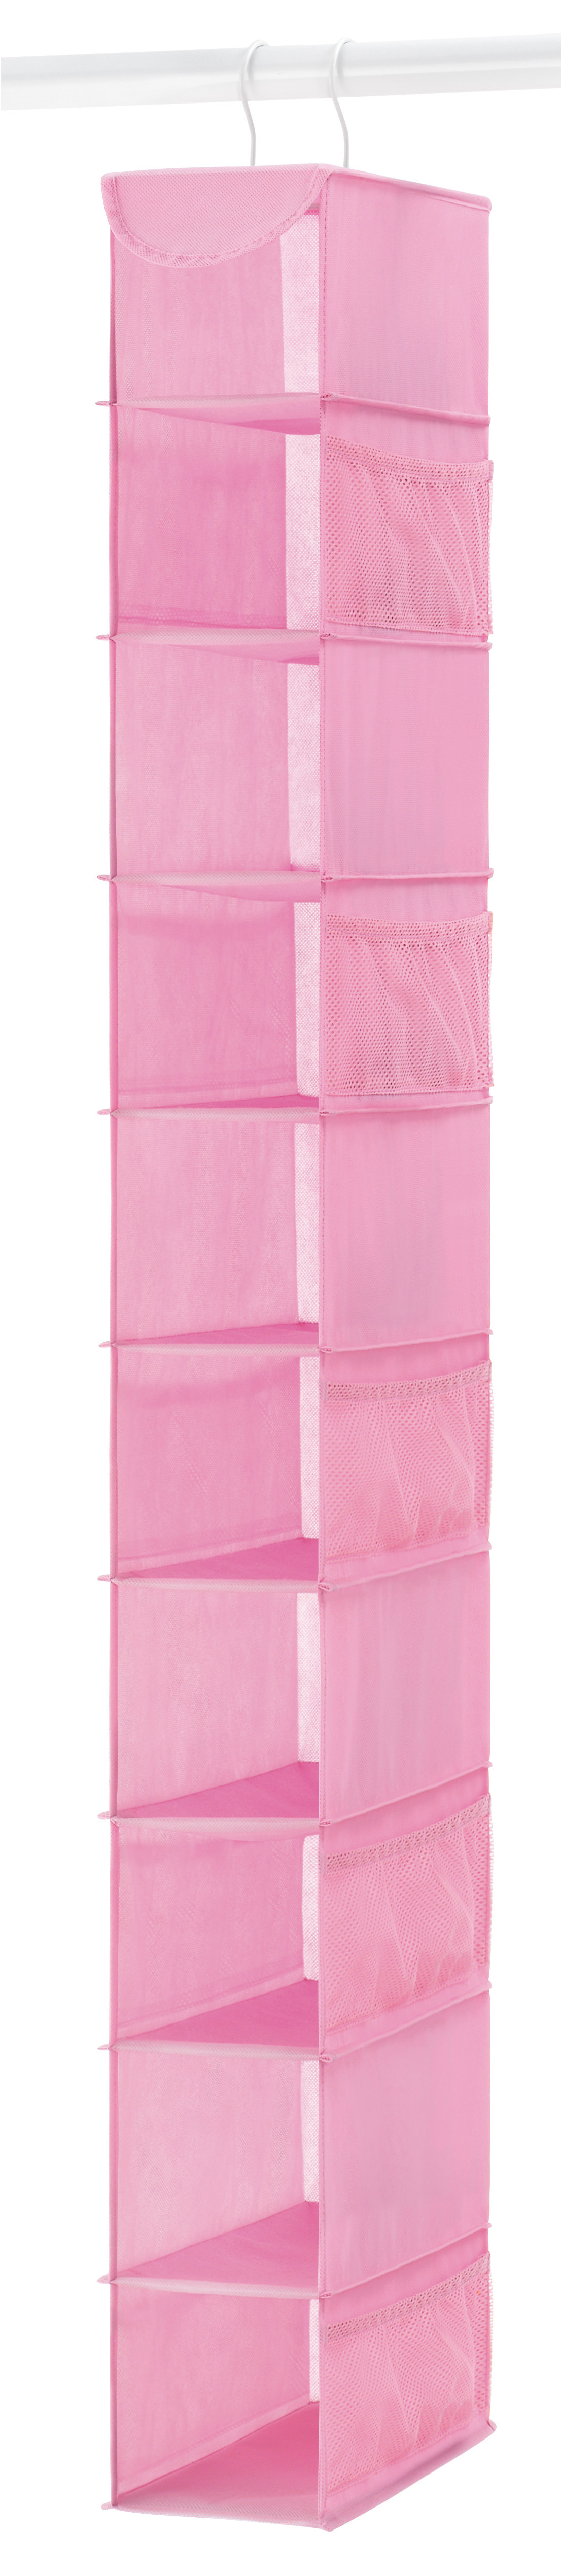 Whitmor 10-Shelf Polyester Mesh Hanging Shoe Shelves - Pink - Use for a Child, Teen, or Adult Room - image 2 of 3